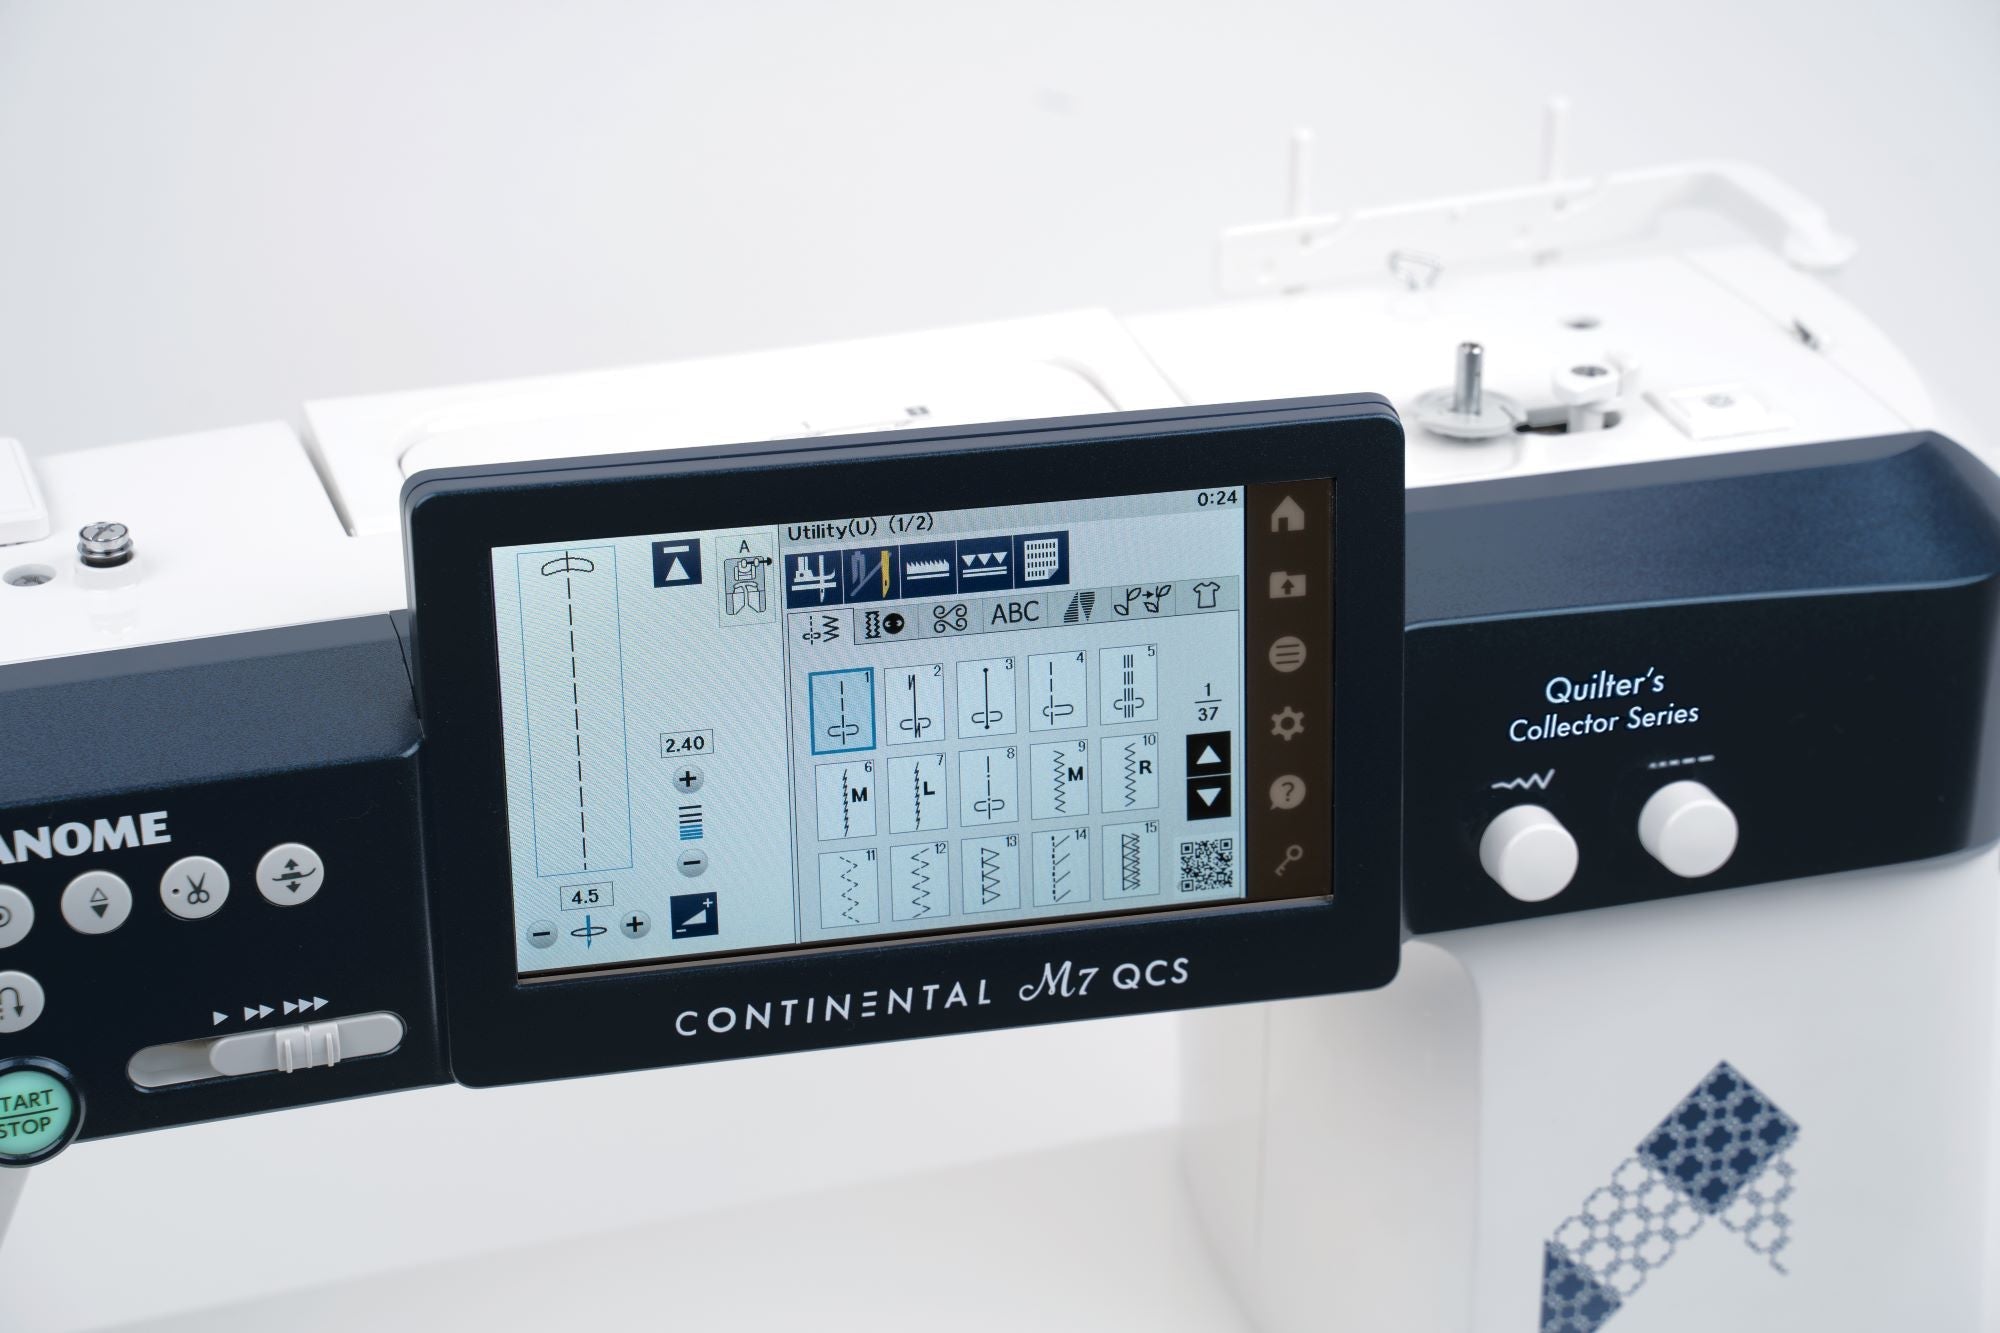 close up of the Janome Continental M7 QCS Sewing and Quilting Machine screen for Sale at World Weidner